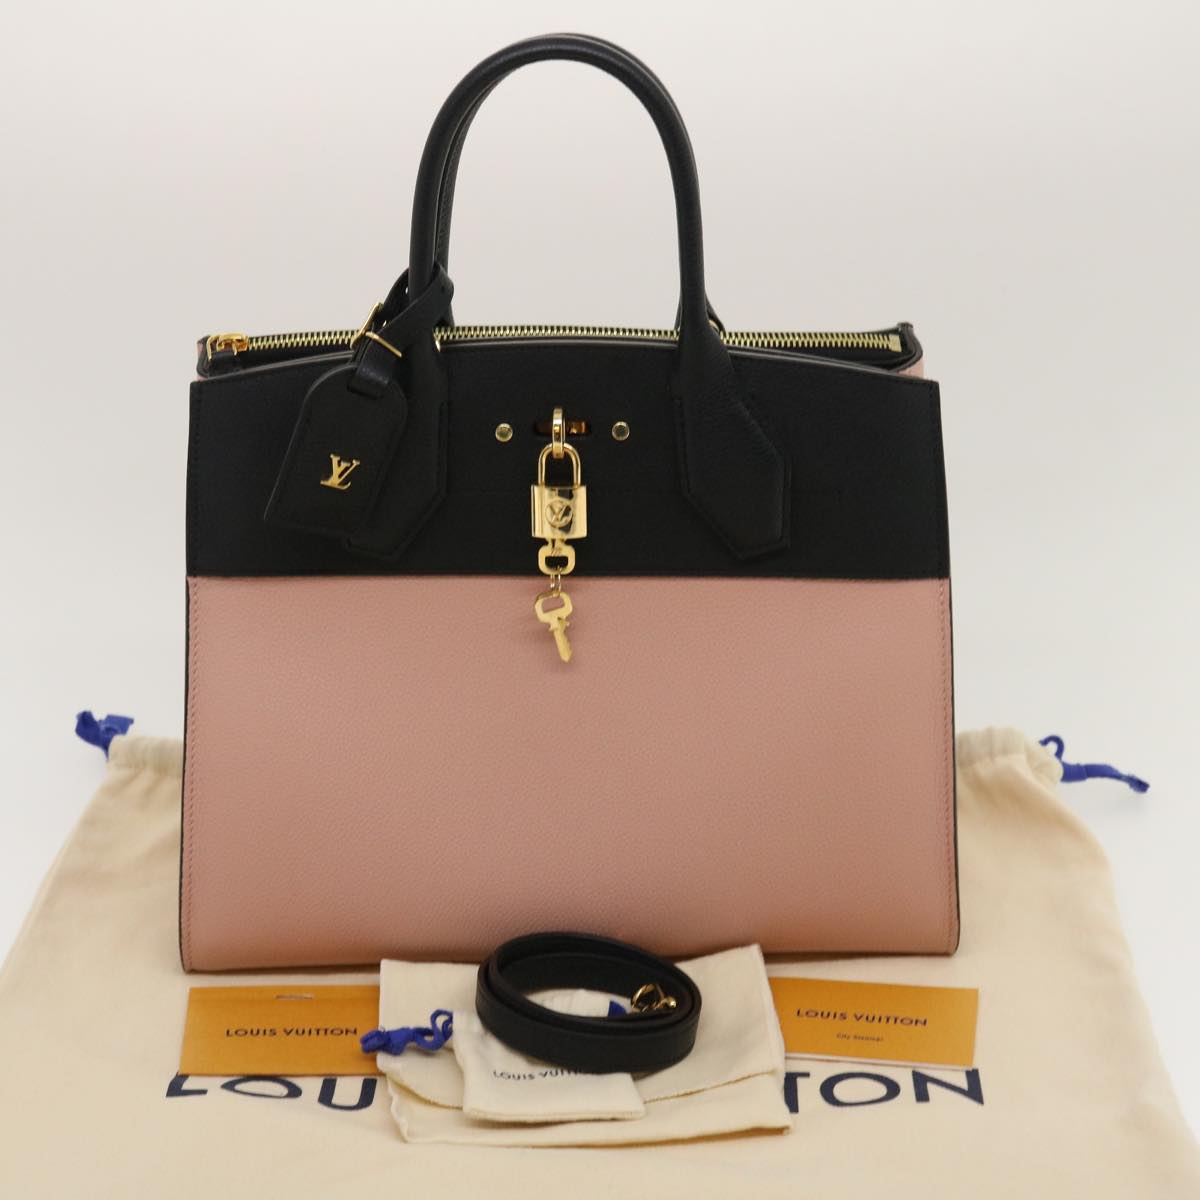 LOUIS VUITTON City Steamer MM Hand Bag Leather 2way Pink M53019 LV Auth am479b